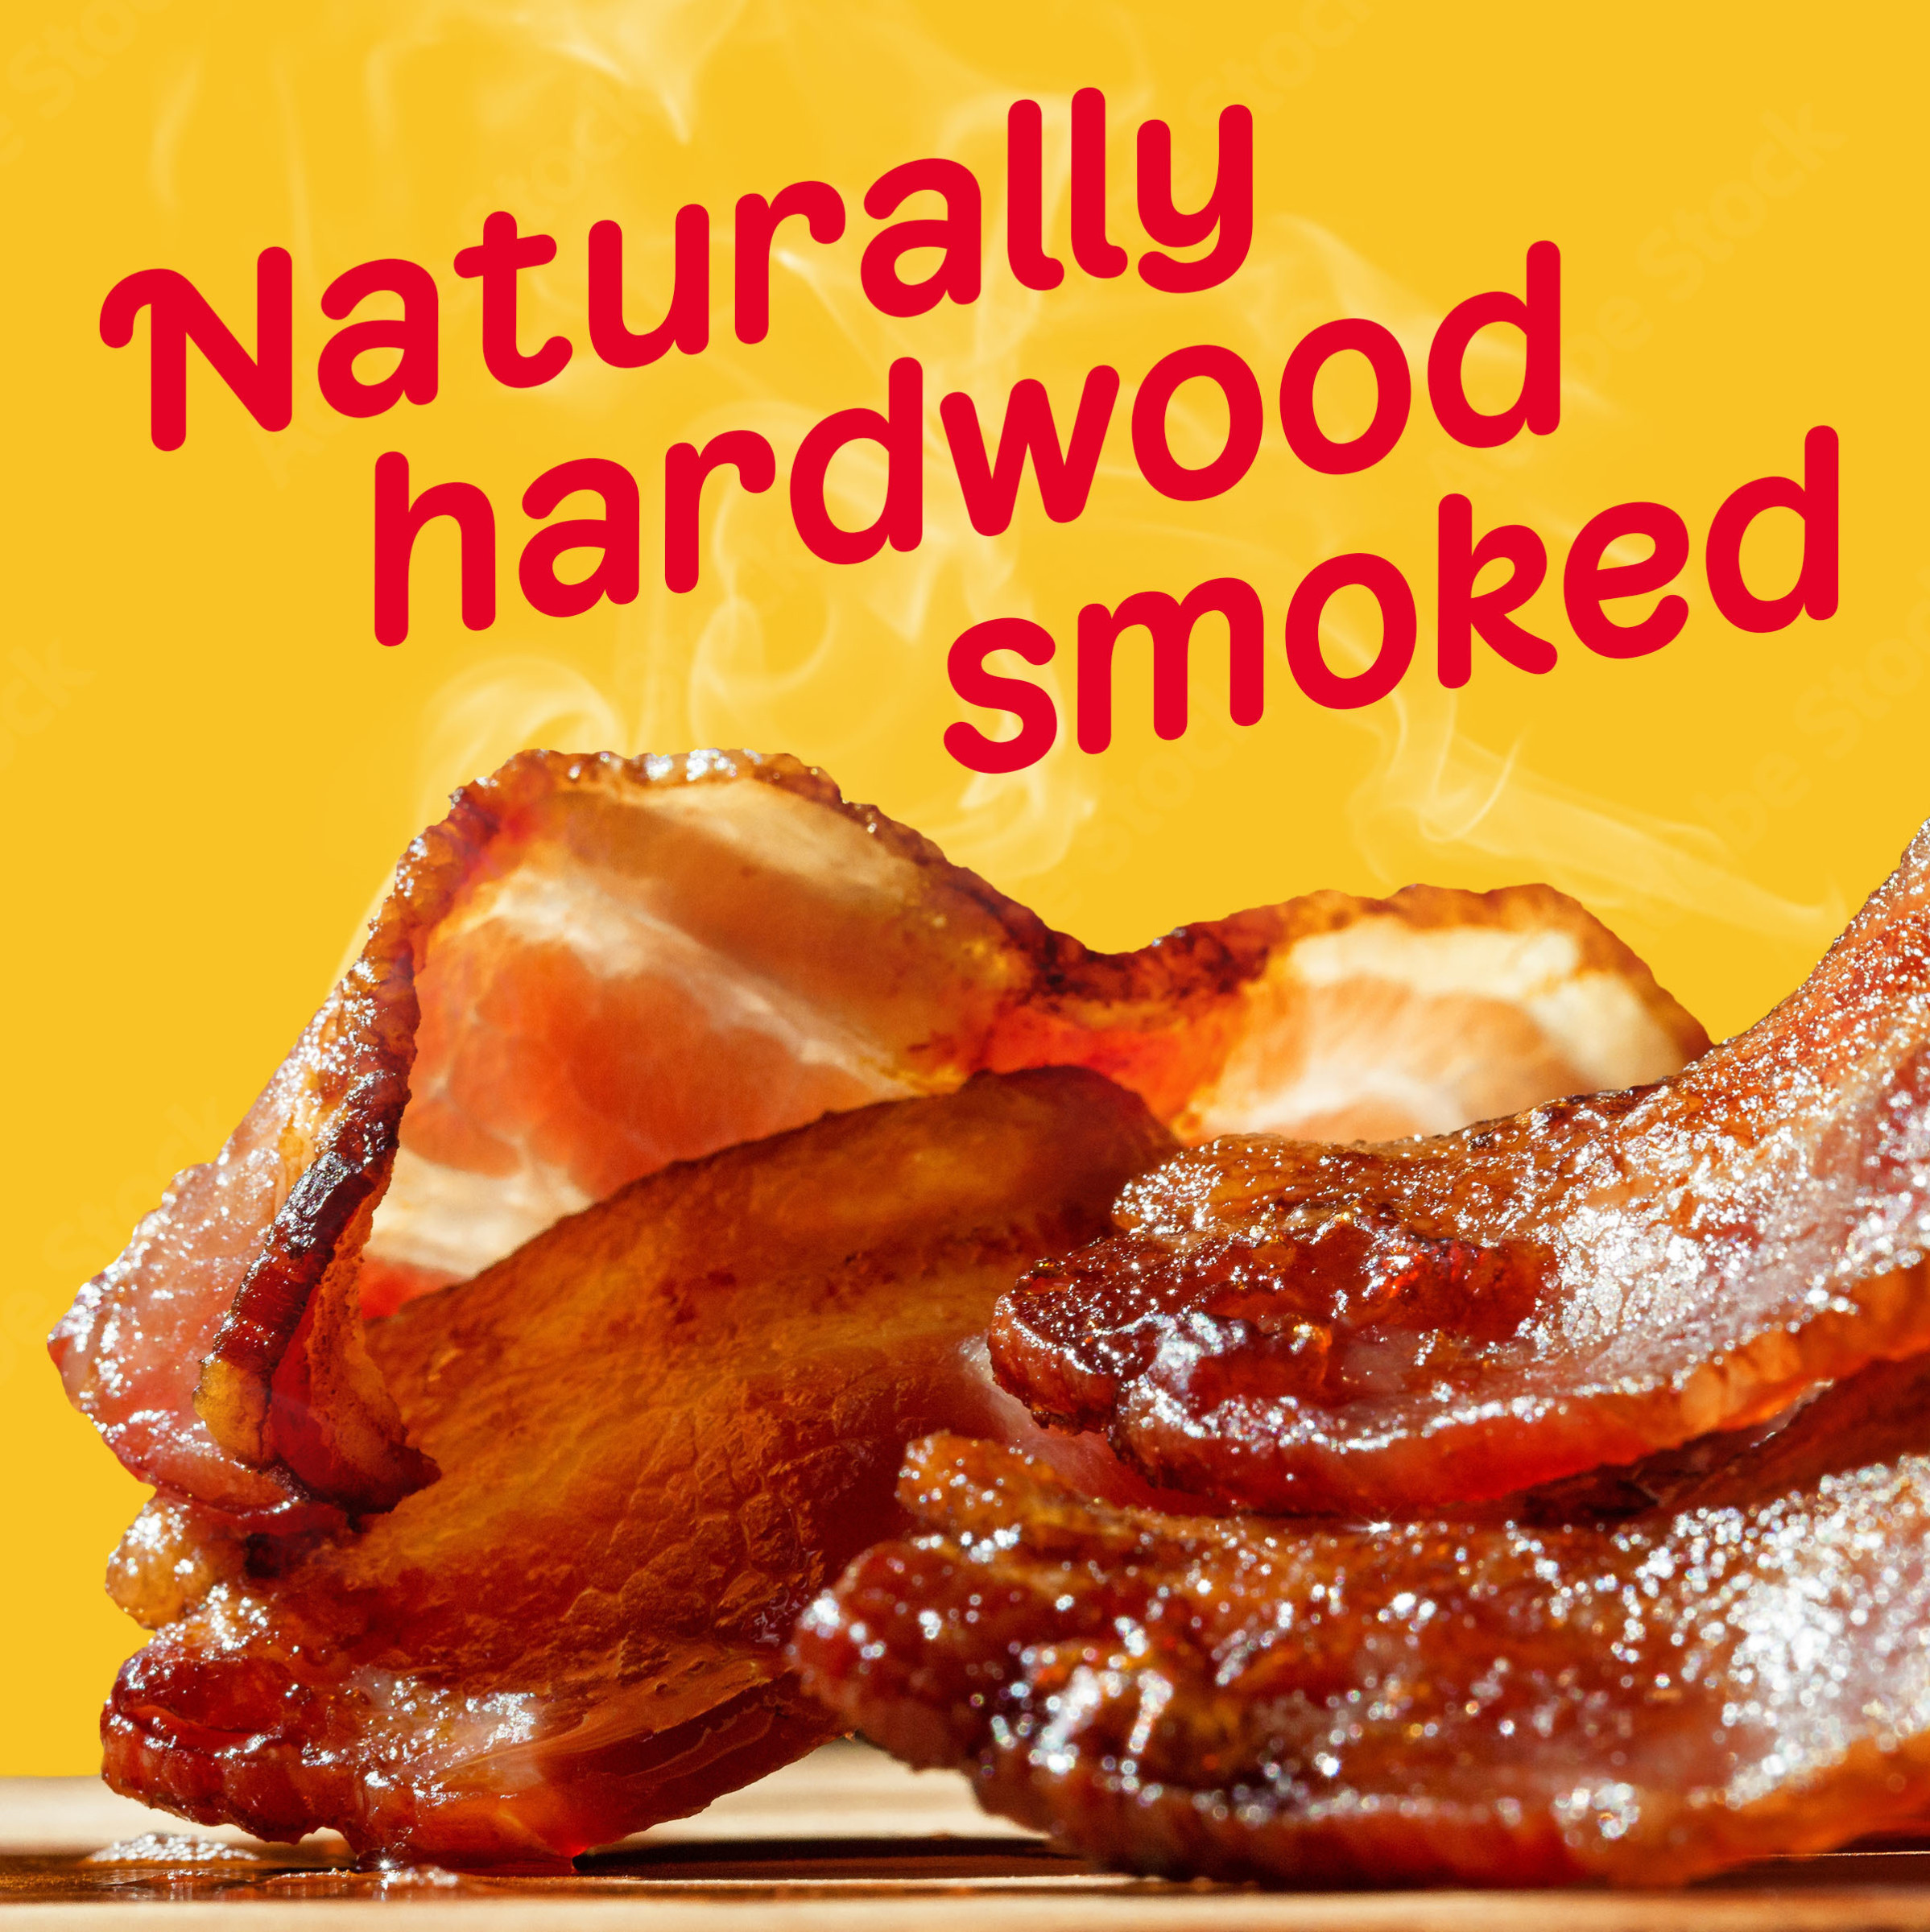 Oscar Mayer Fully Cooked & Gluten Free Turkey Bacon with 62% Less Fat & 57% Less Sodium, 3 ct Box, 12 oz Packs, 53-55 total slices - image 3 of 15